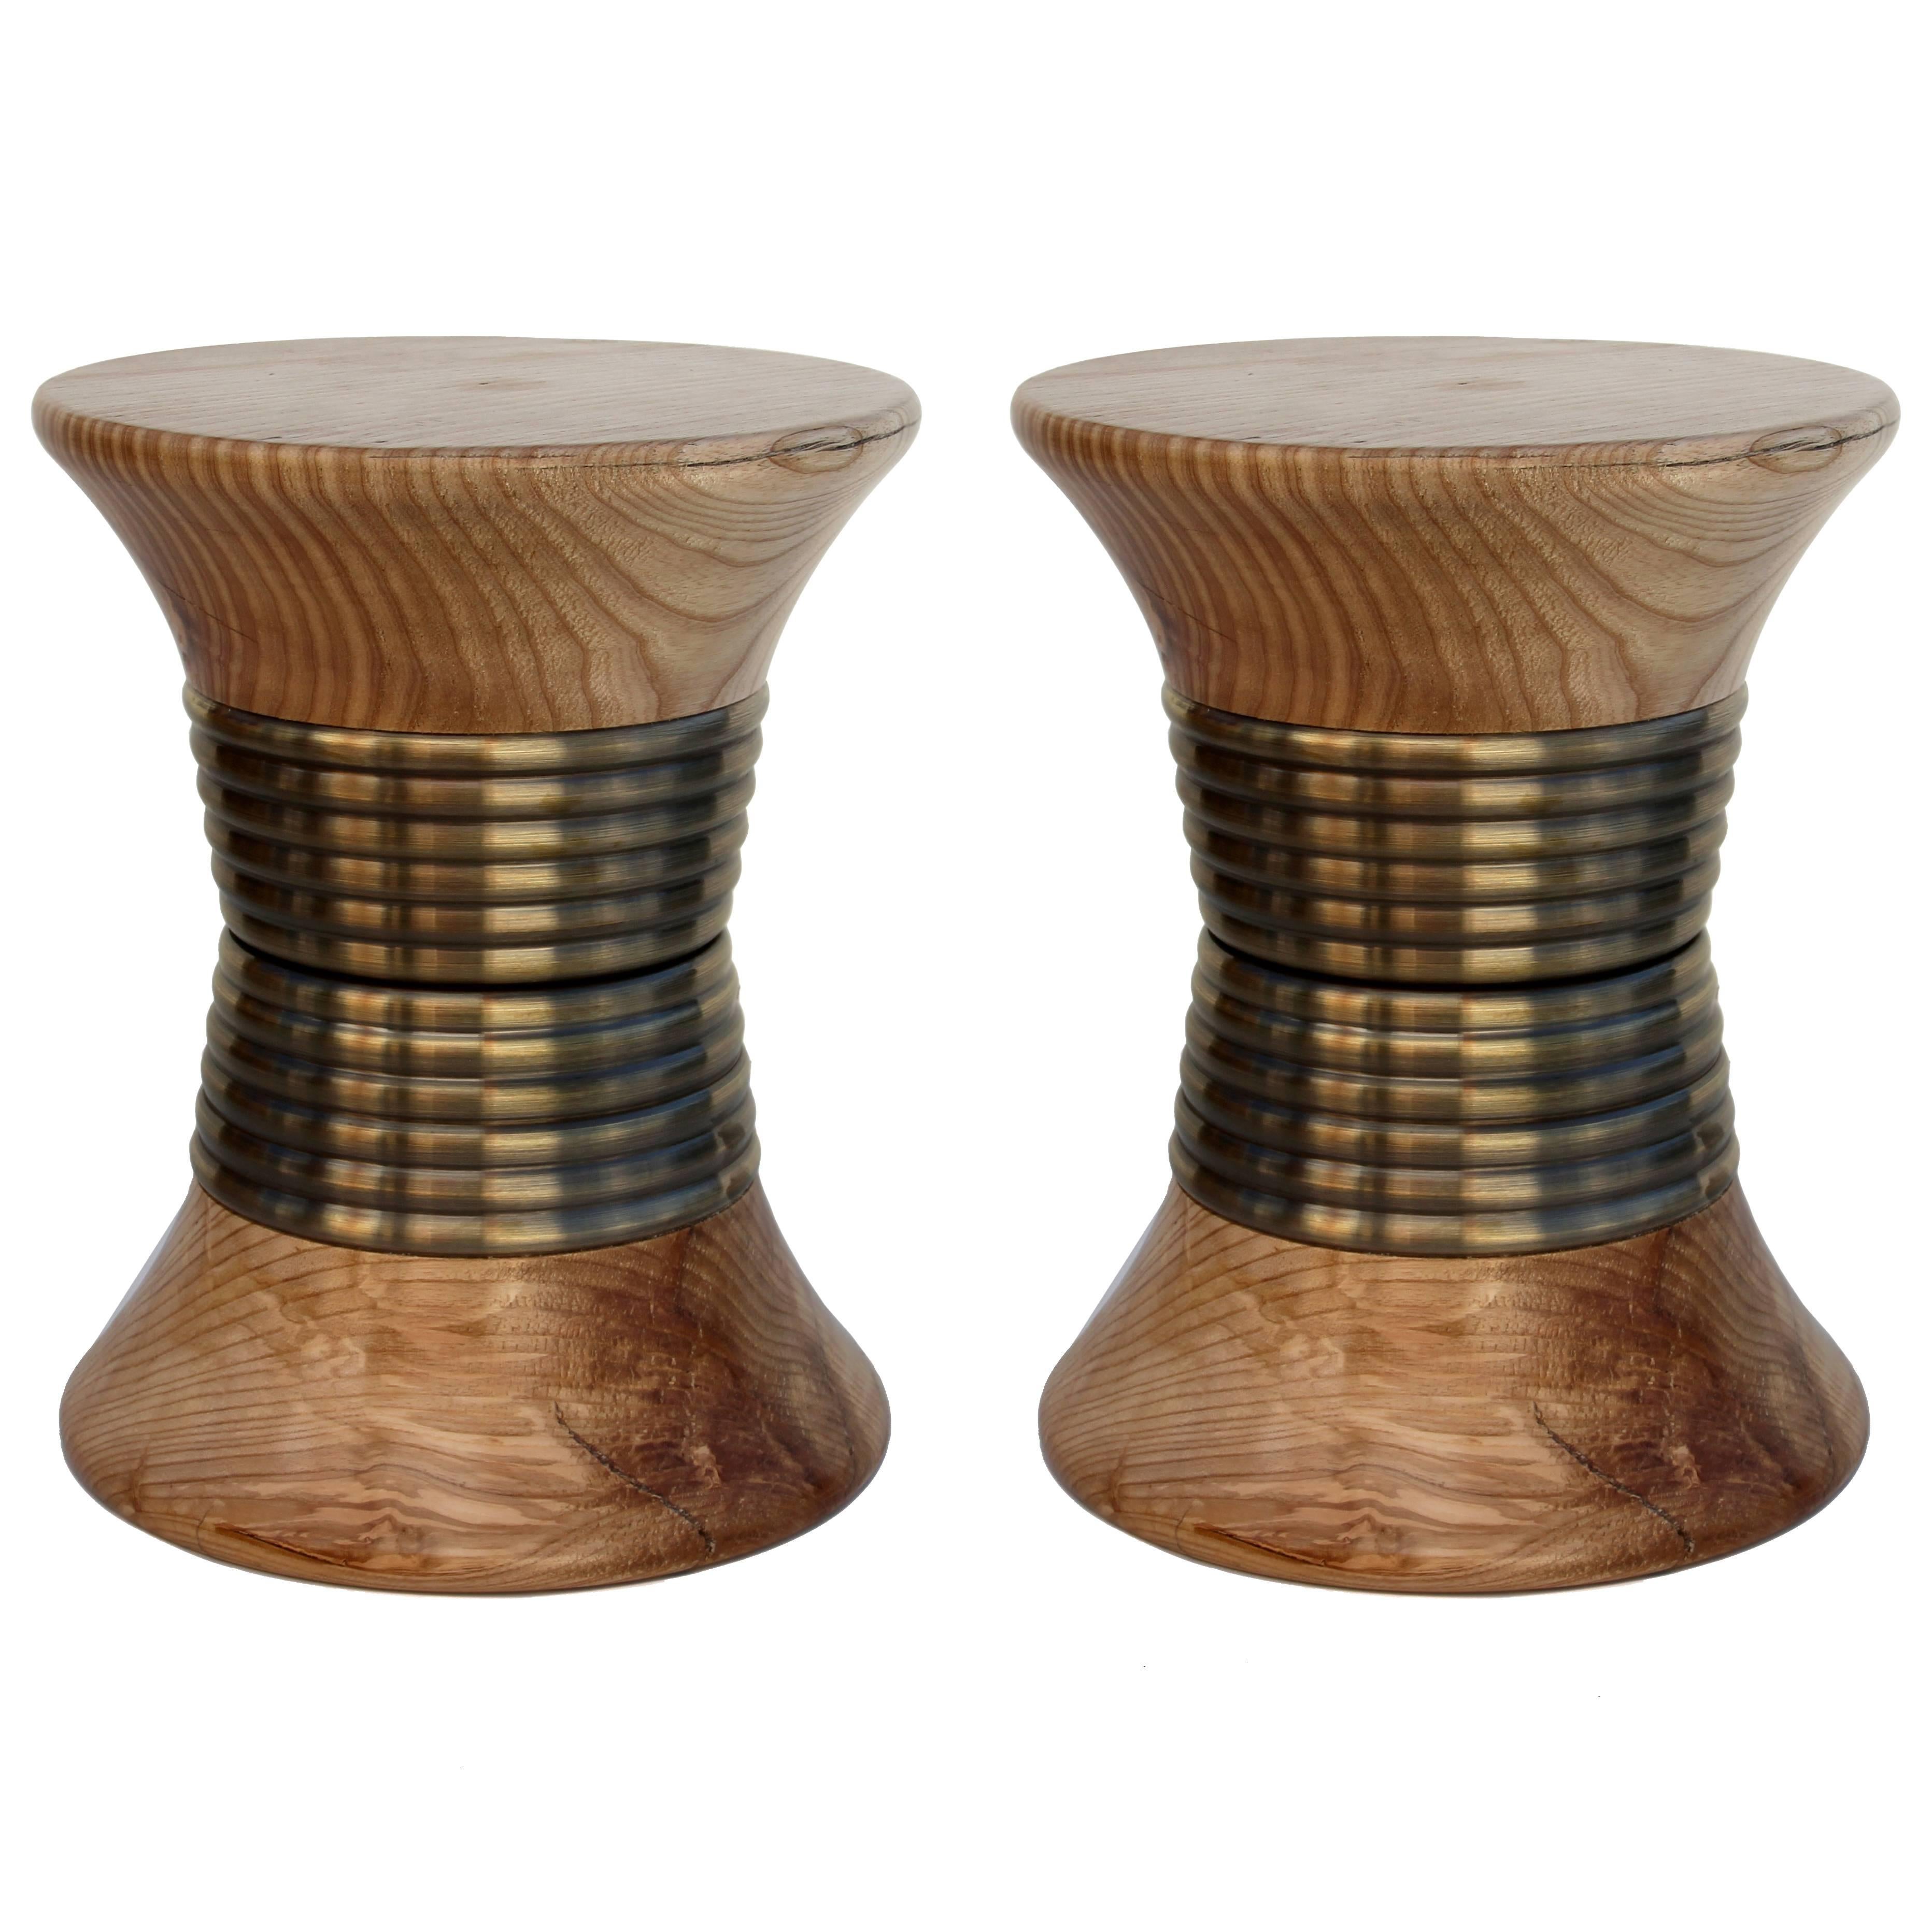 Pair of European Modern Wood and Brass Padaung Stool Side Tables by Brabbu For Sale